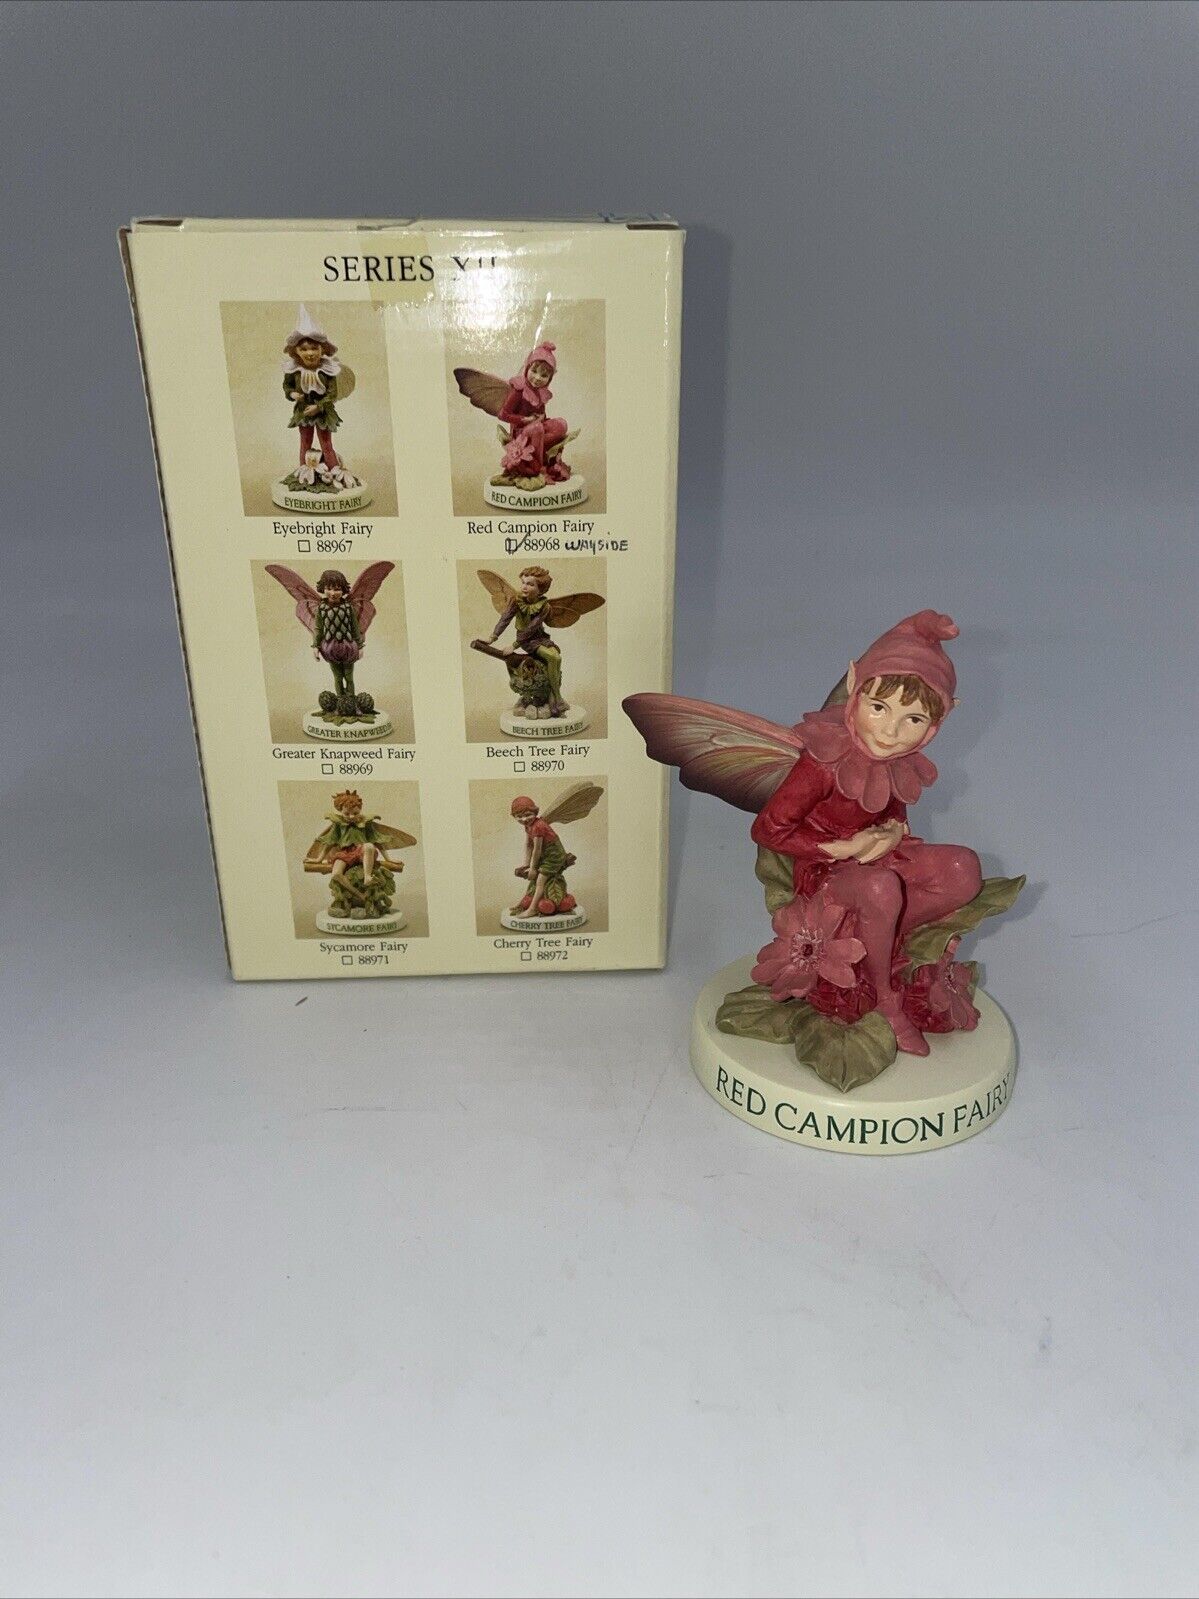 Red Champion Fairy , Cicely Mary Barker Flower Fairies figurine, Series XII